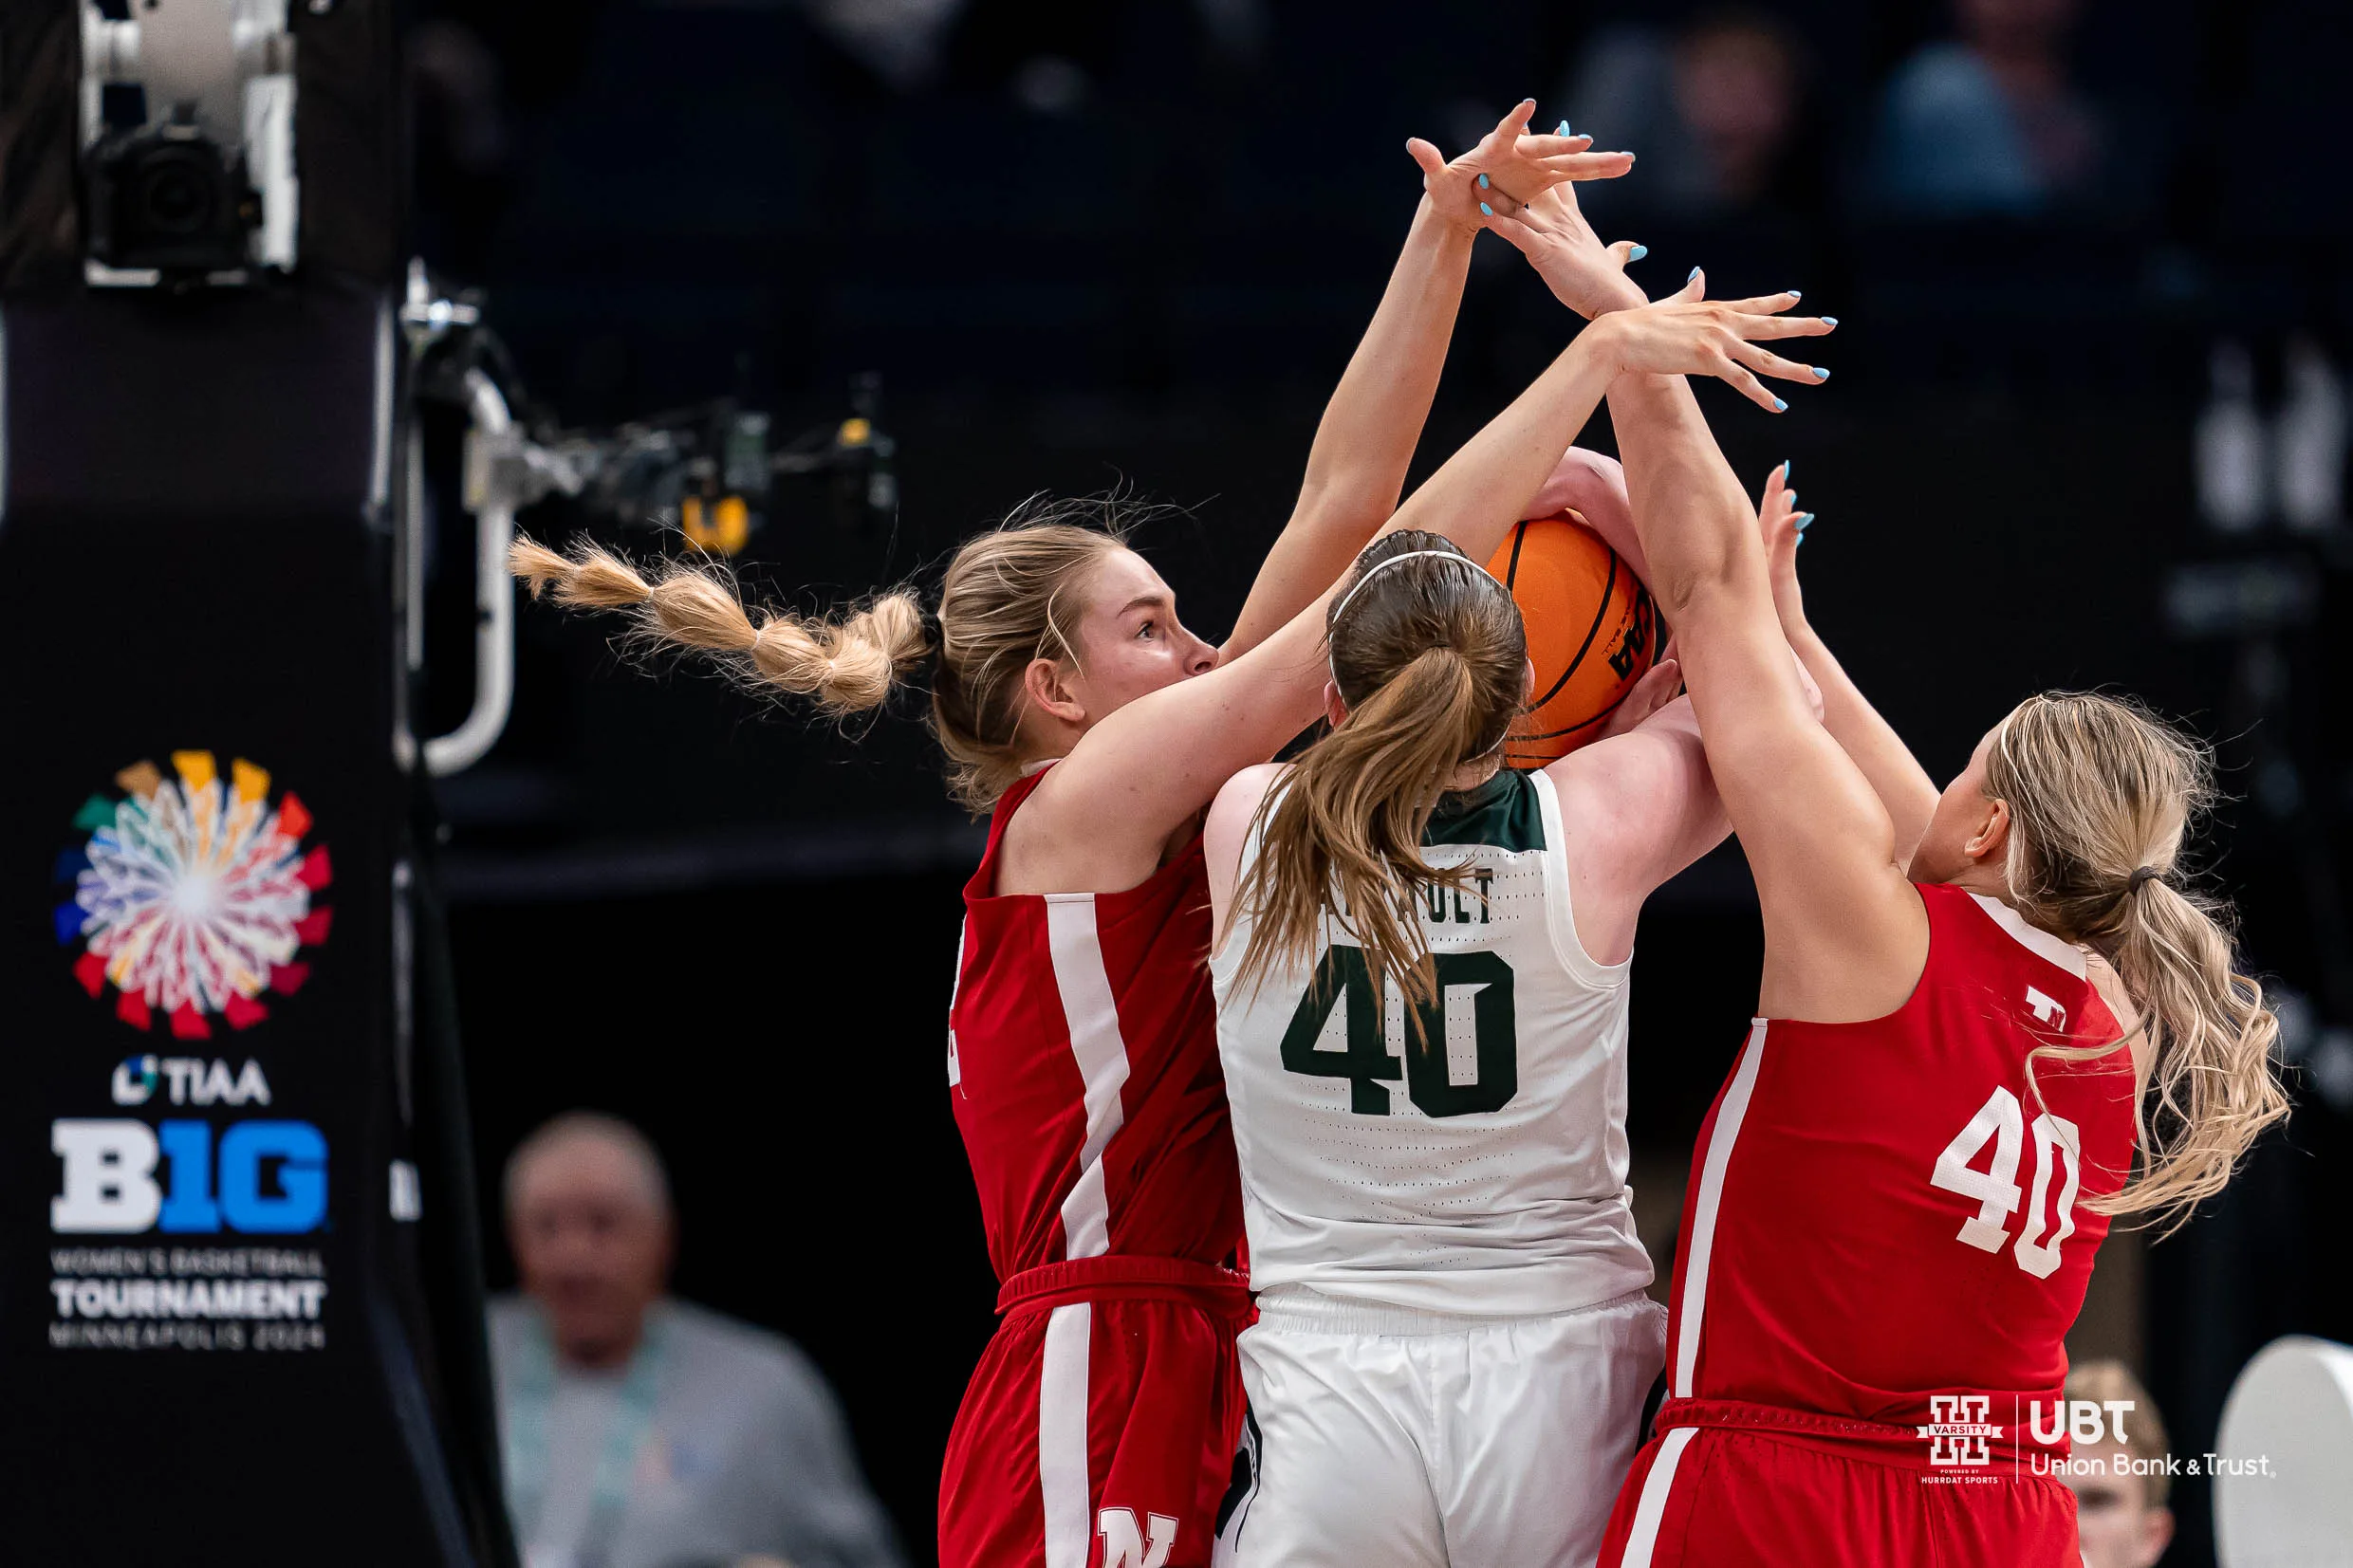 Nebraska’s Chance at Big Ten Tourney Title Game May Rely on the Frontcourt